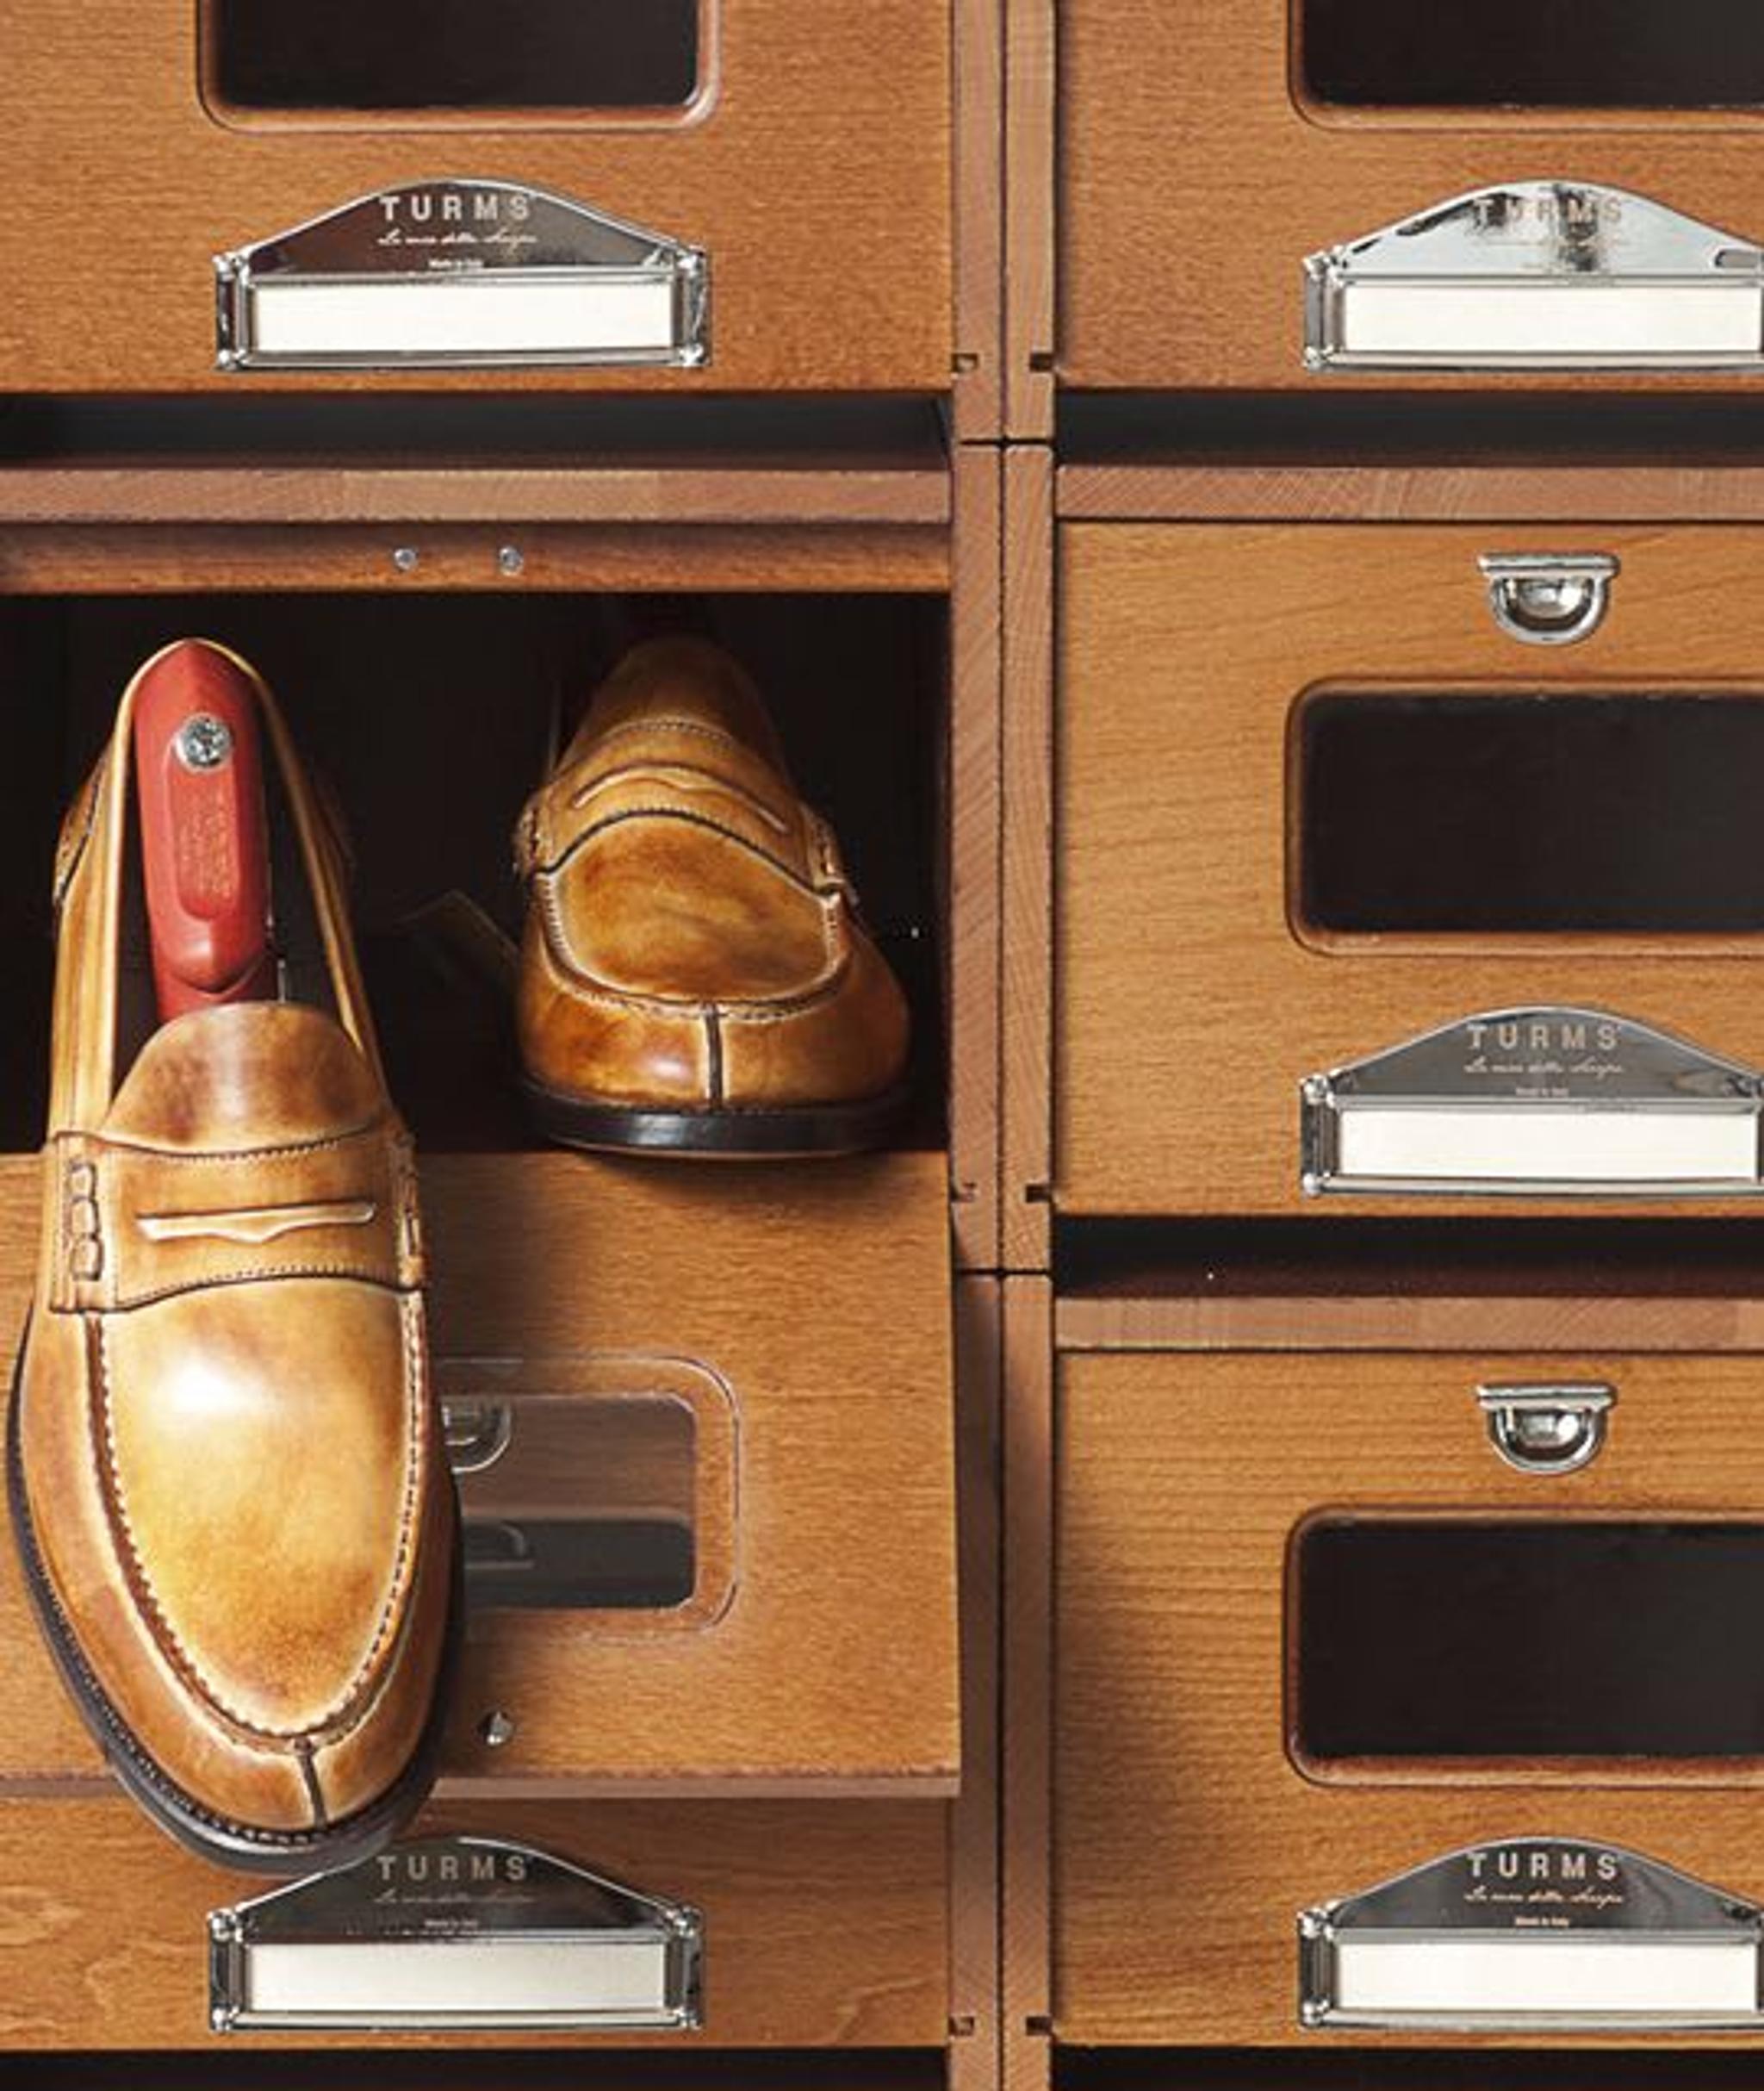 Exquisite accessories crafted for Italian leather shoes.